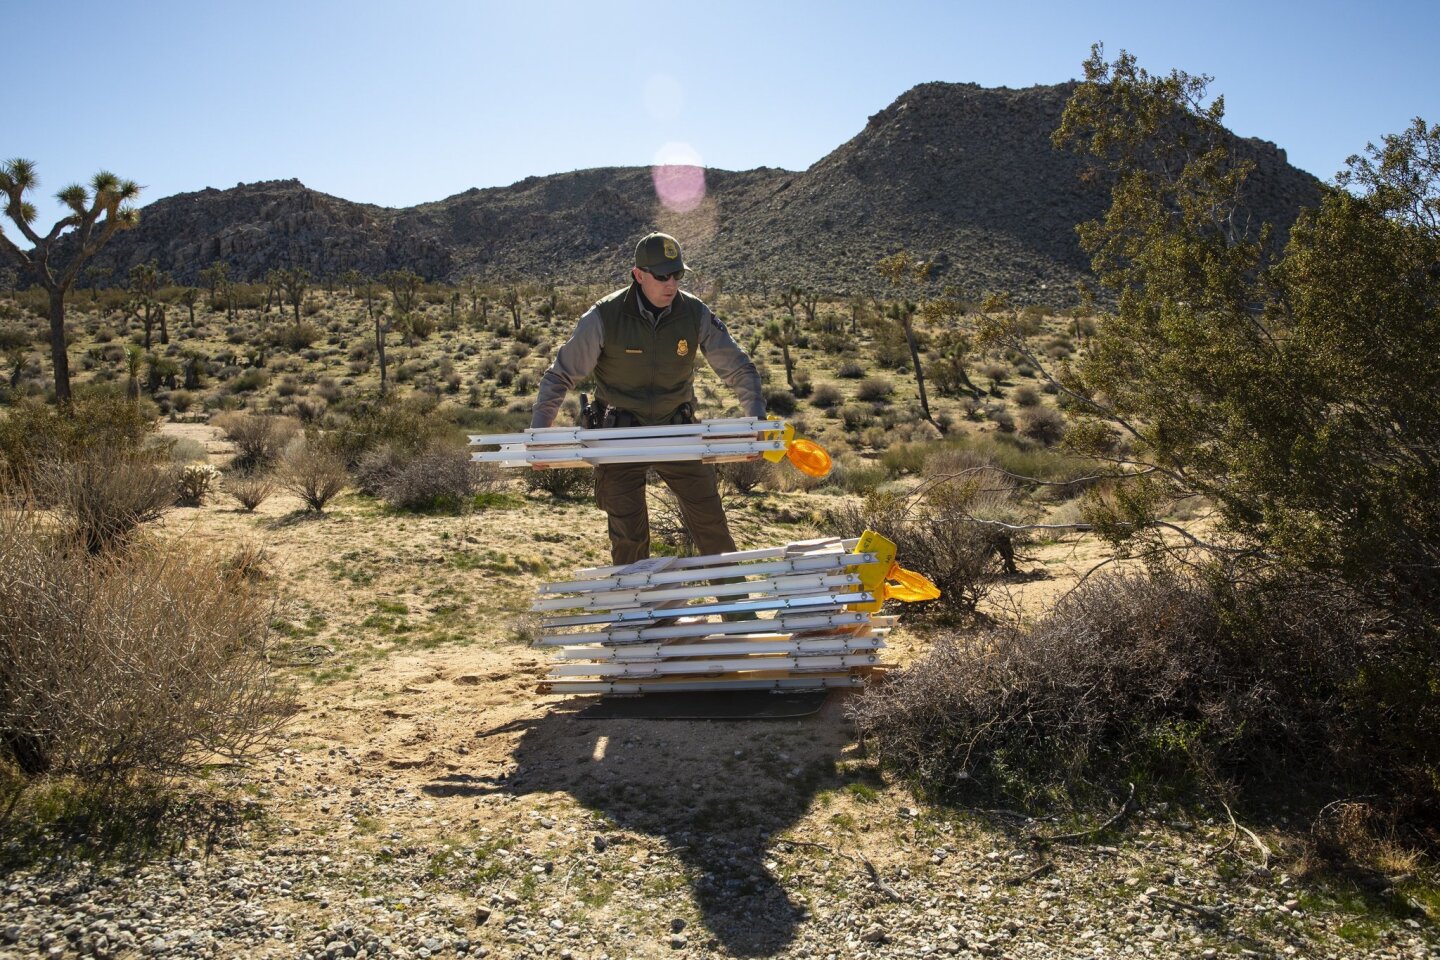 Ranger Rob Evans places temporary barriers off the side of the road near Joshua Tree National Park. The Park will close to all visitors because of damage to the park during the partial government shutdown.